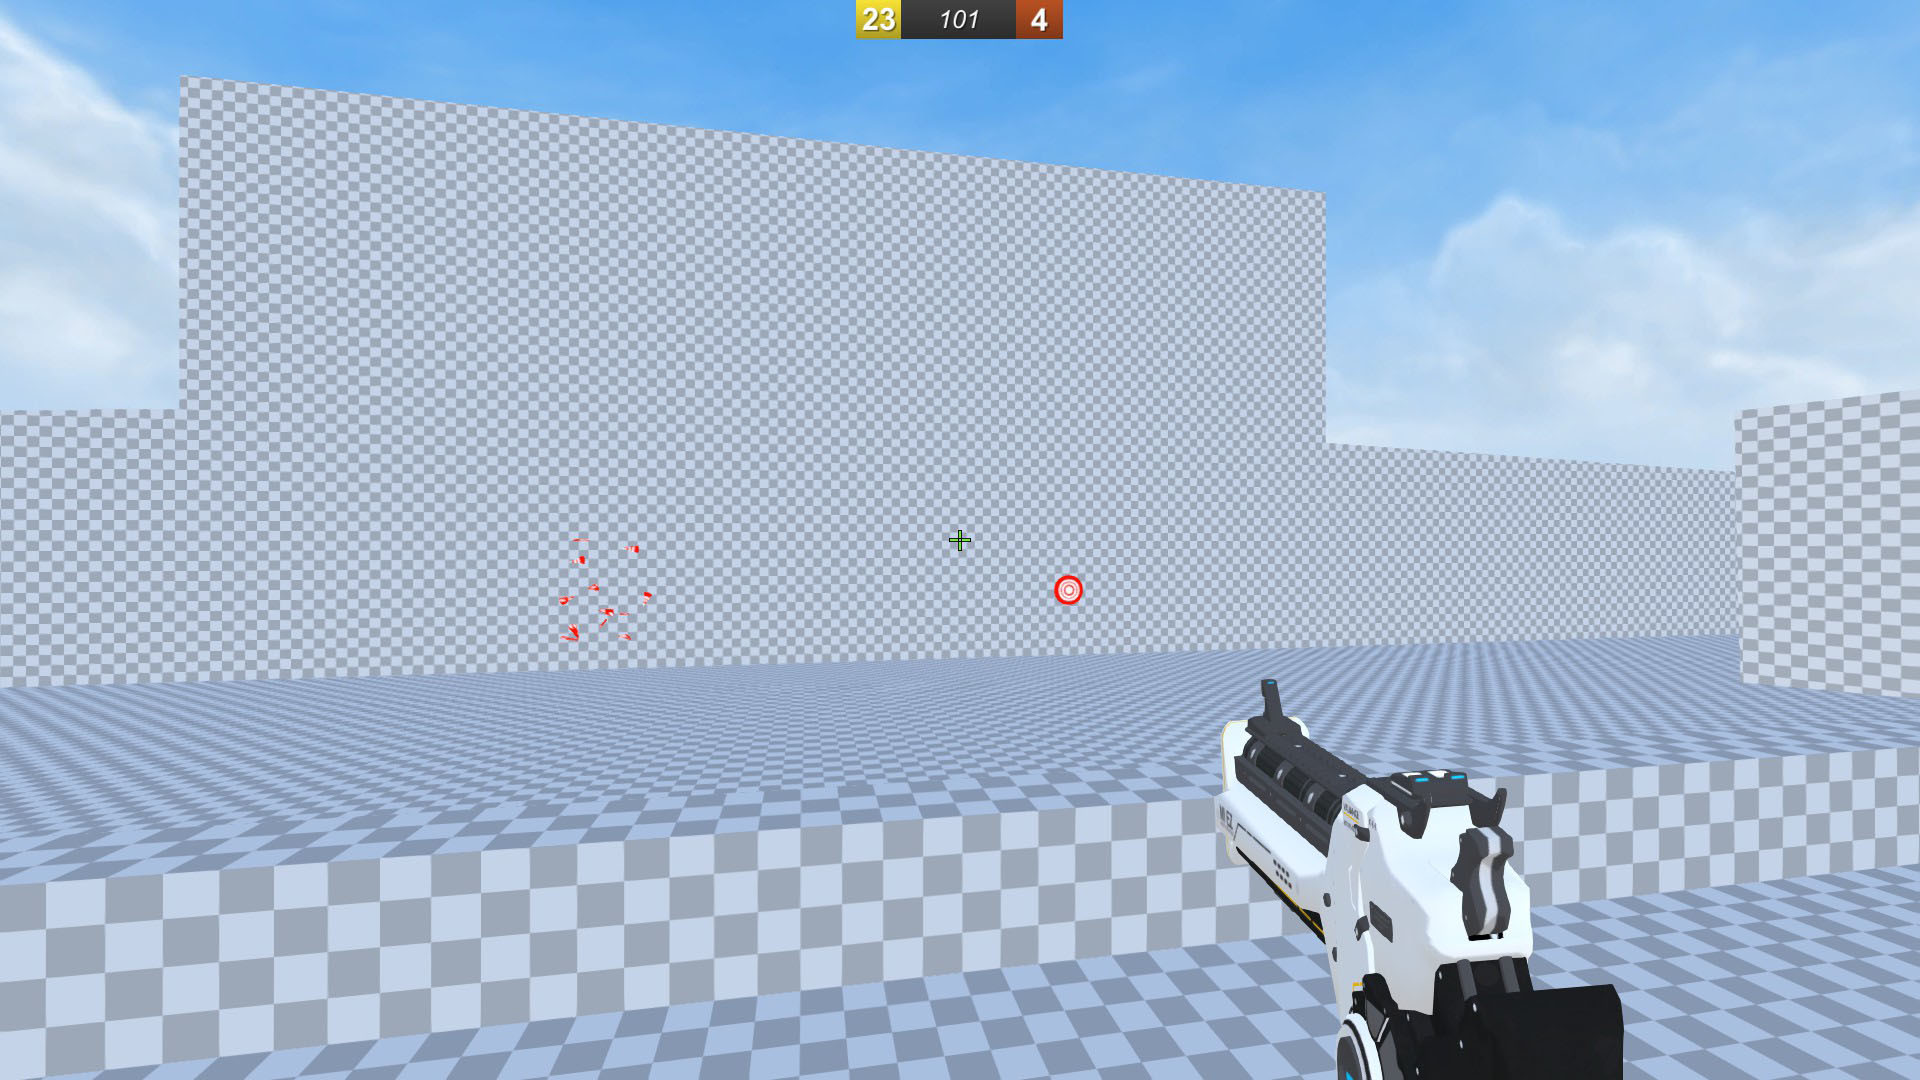 Mightyy's FPS Aim Trainer on Steam